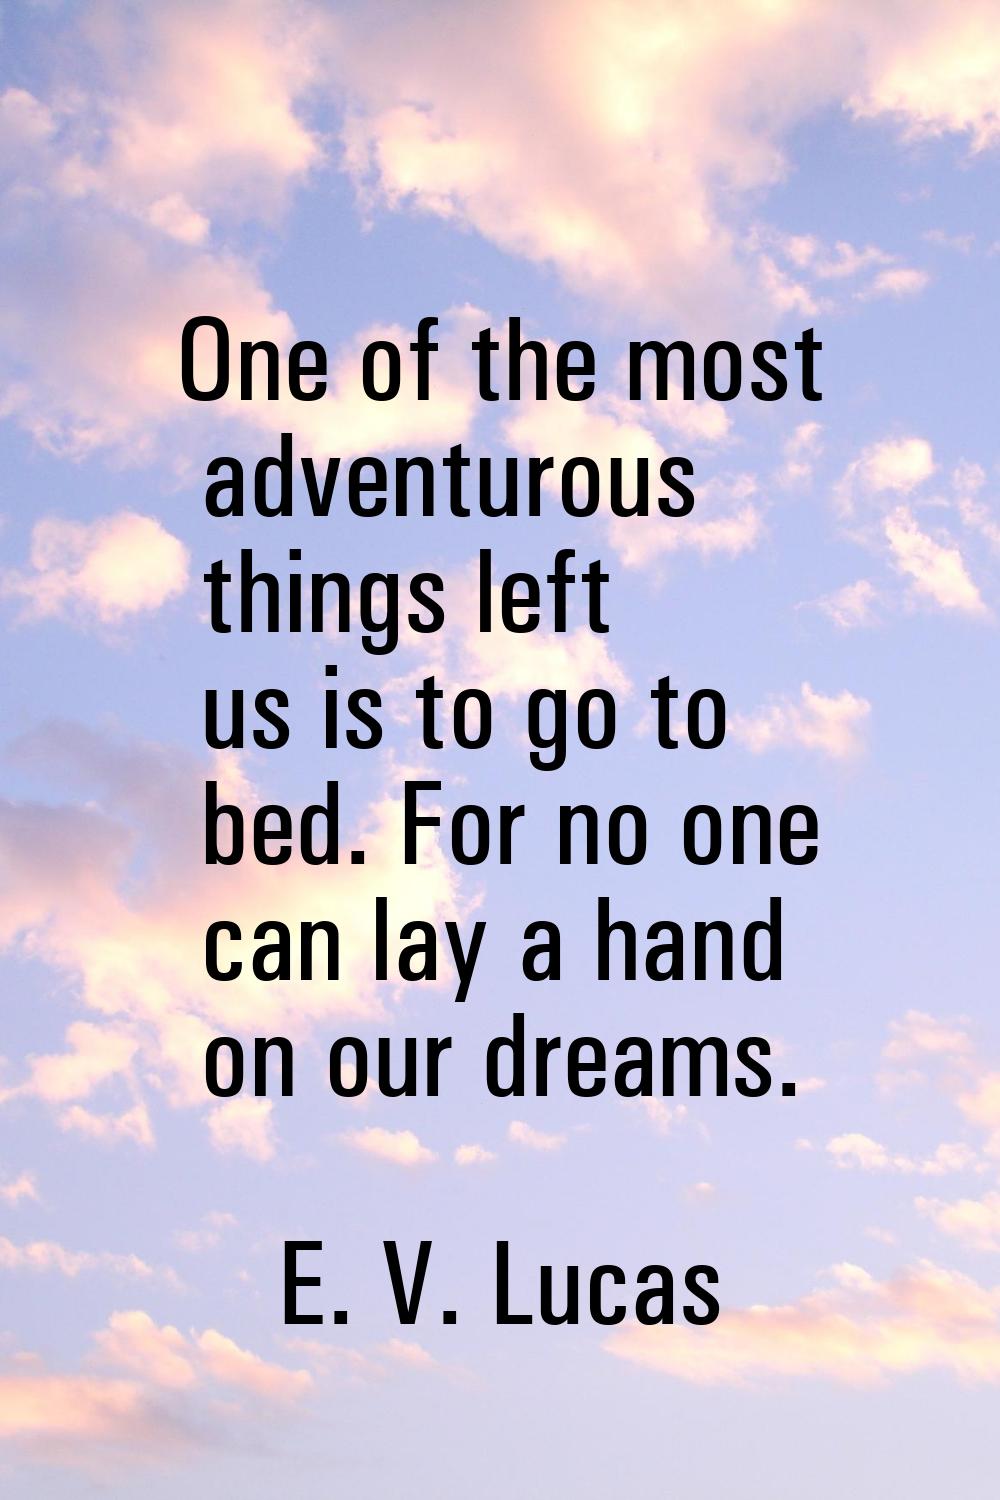 One of the most adventurous things left us is to go to bed. For no one can lay a hand on our dreams